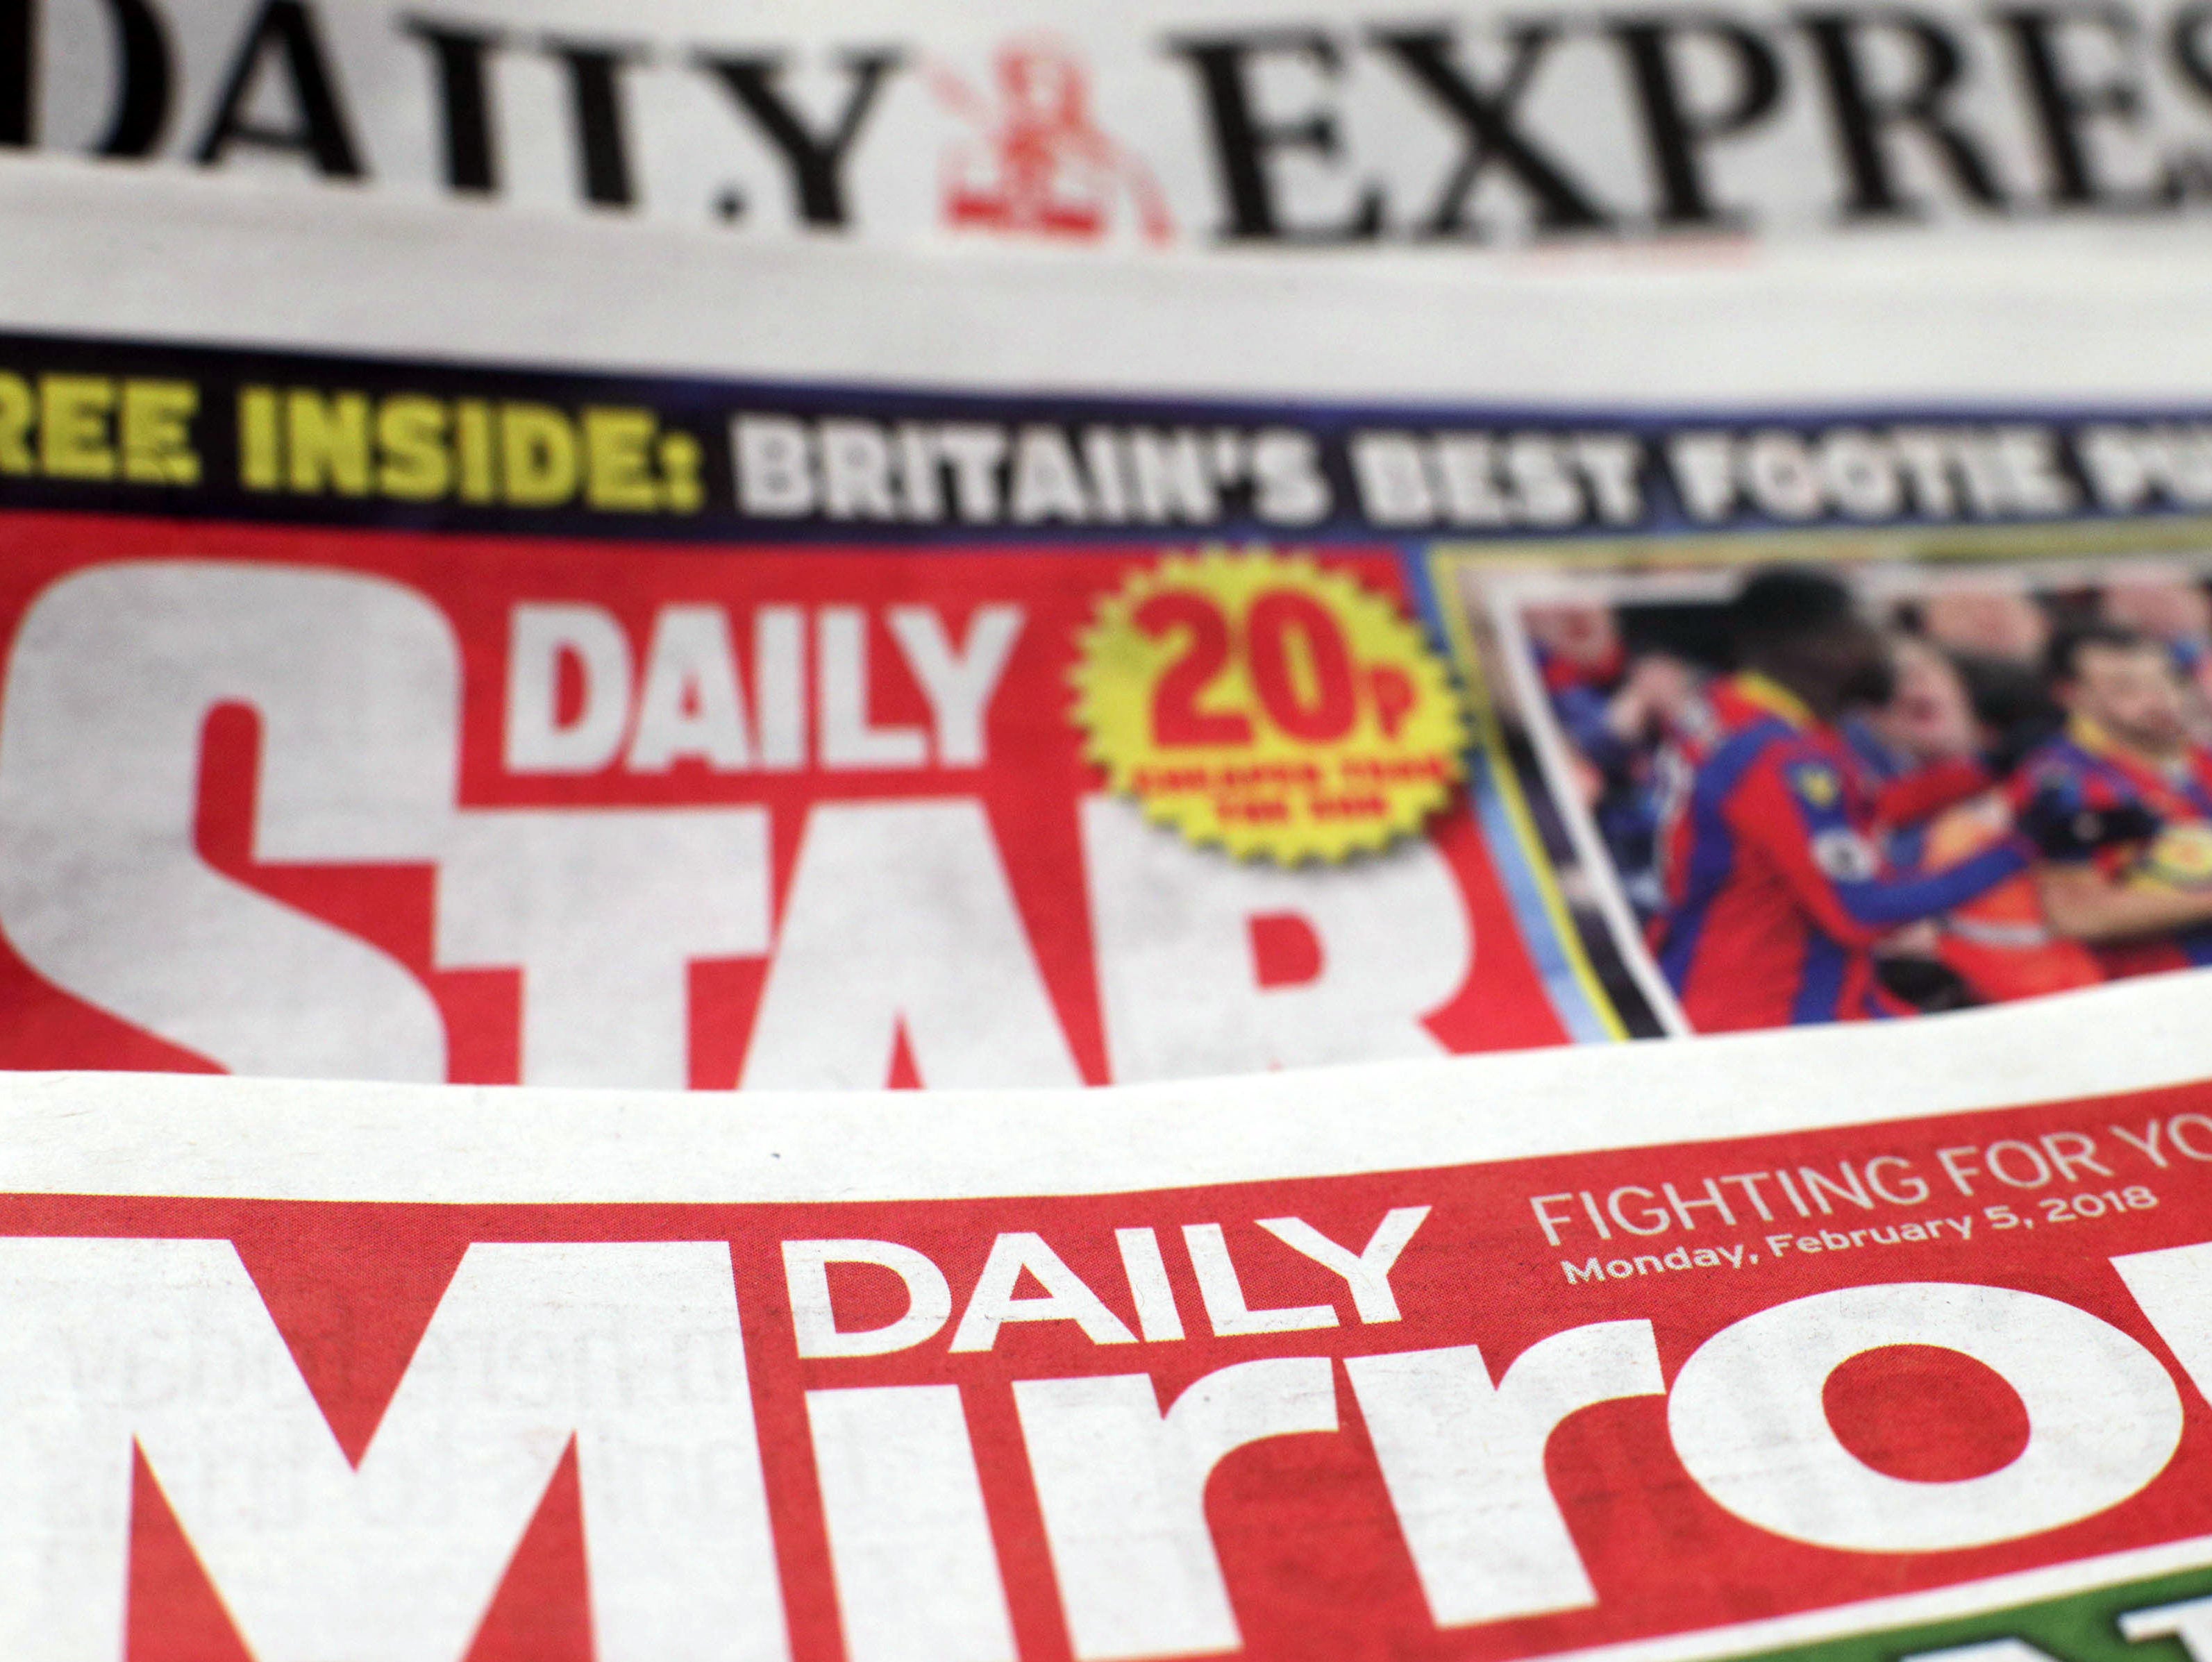 Trinity Mirror shareholders strongly back Express Newspapers buyout